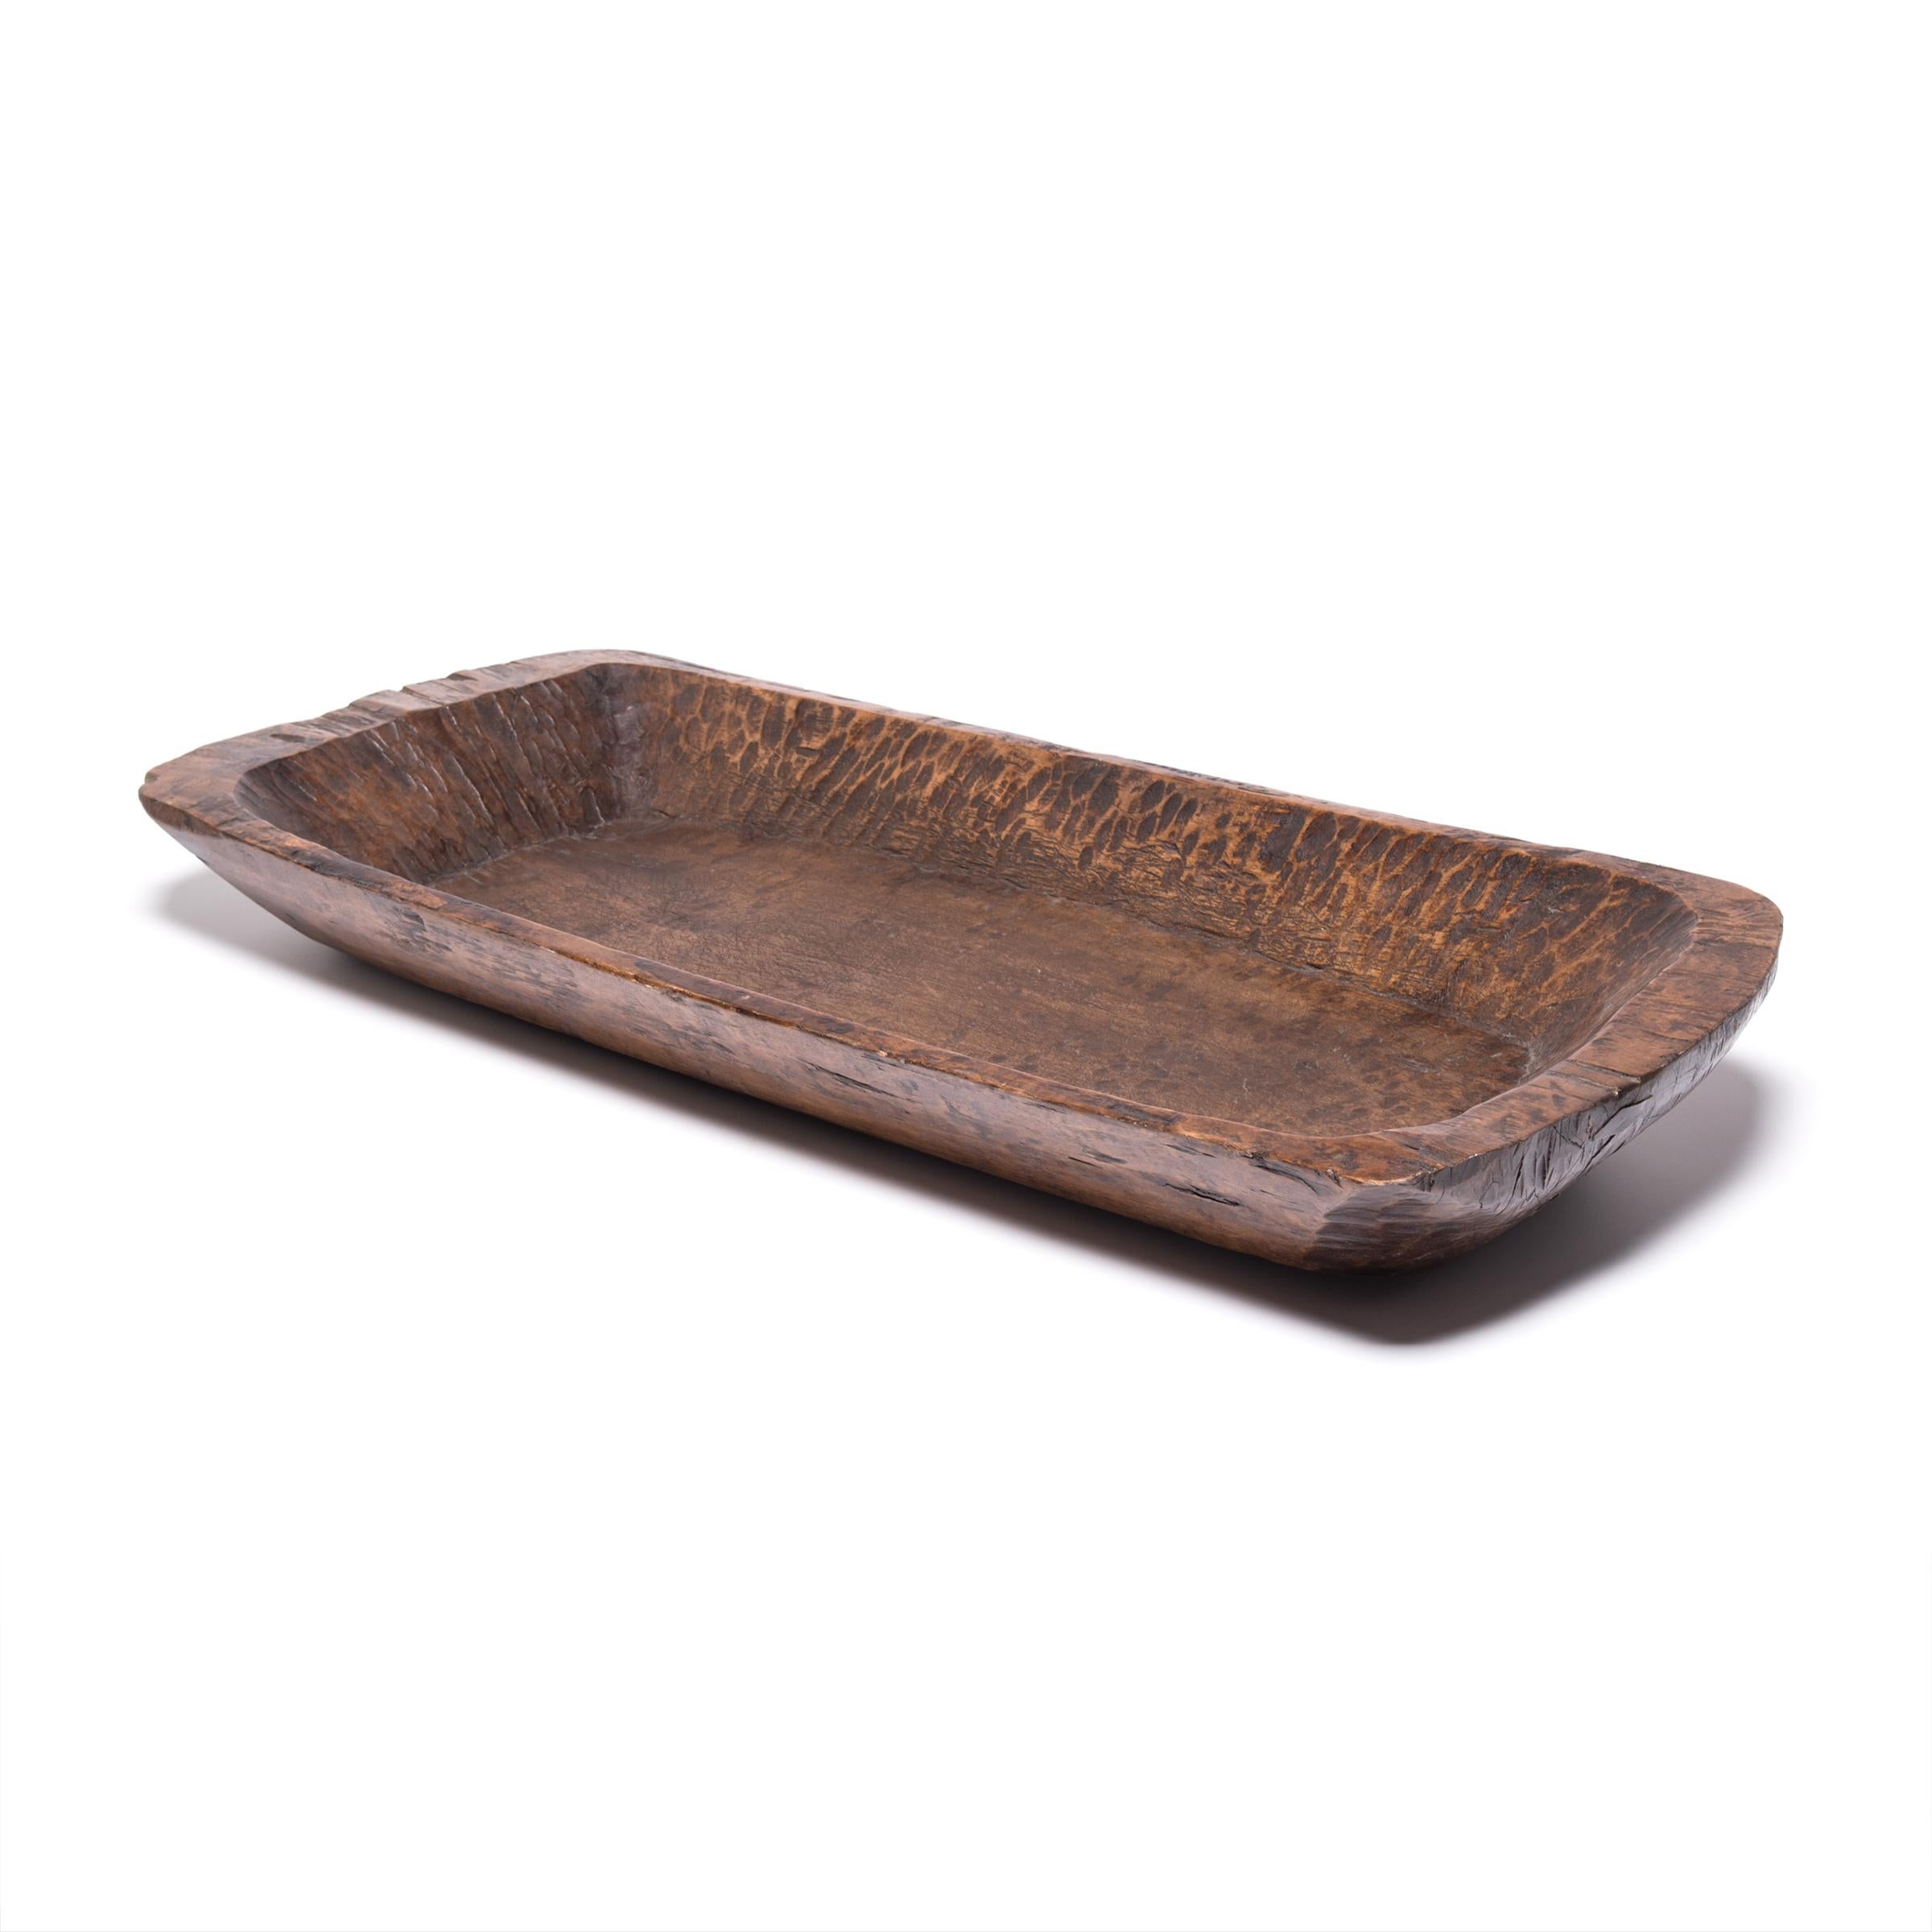 Carved from a single piece of northern Elmwood, this hundred year old butcher’s tray made in Shanxi province charms with its rusticity and organic form. Marked with use and distinguished by the natural grain and knots of wood, the rectangular tray